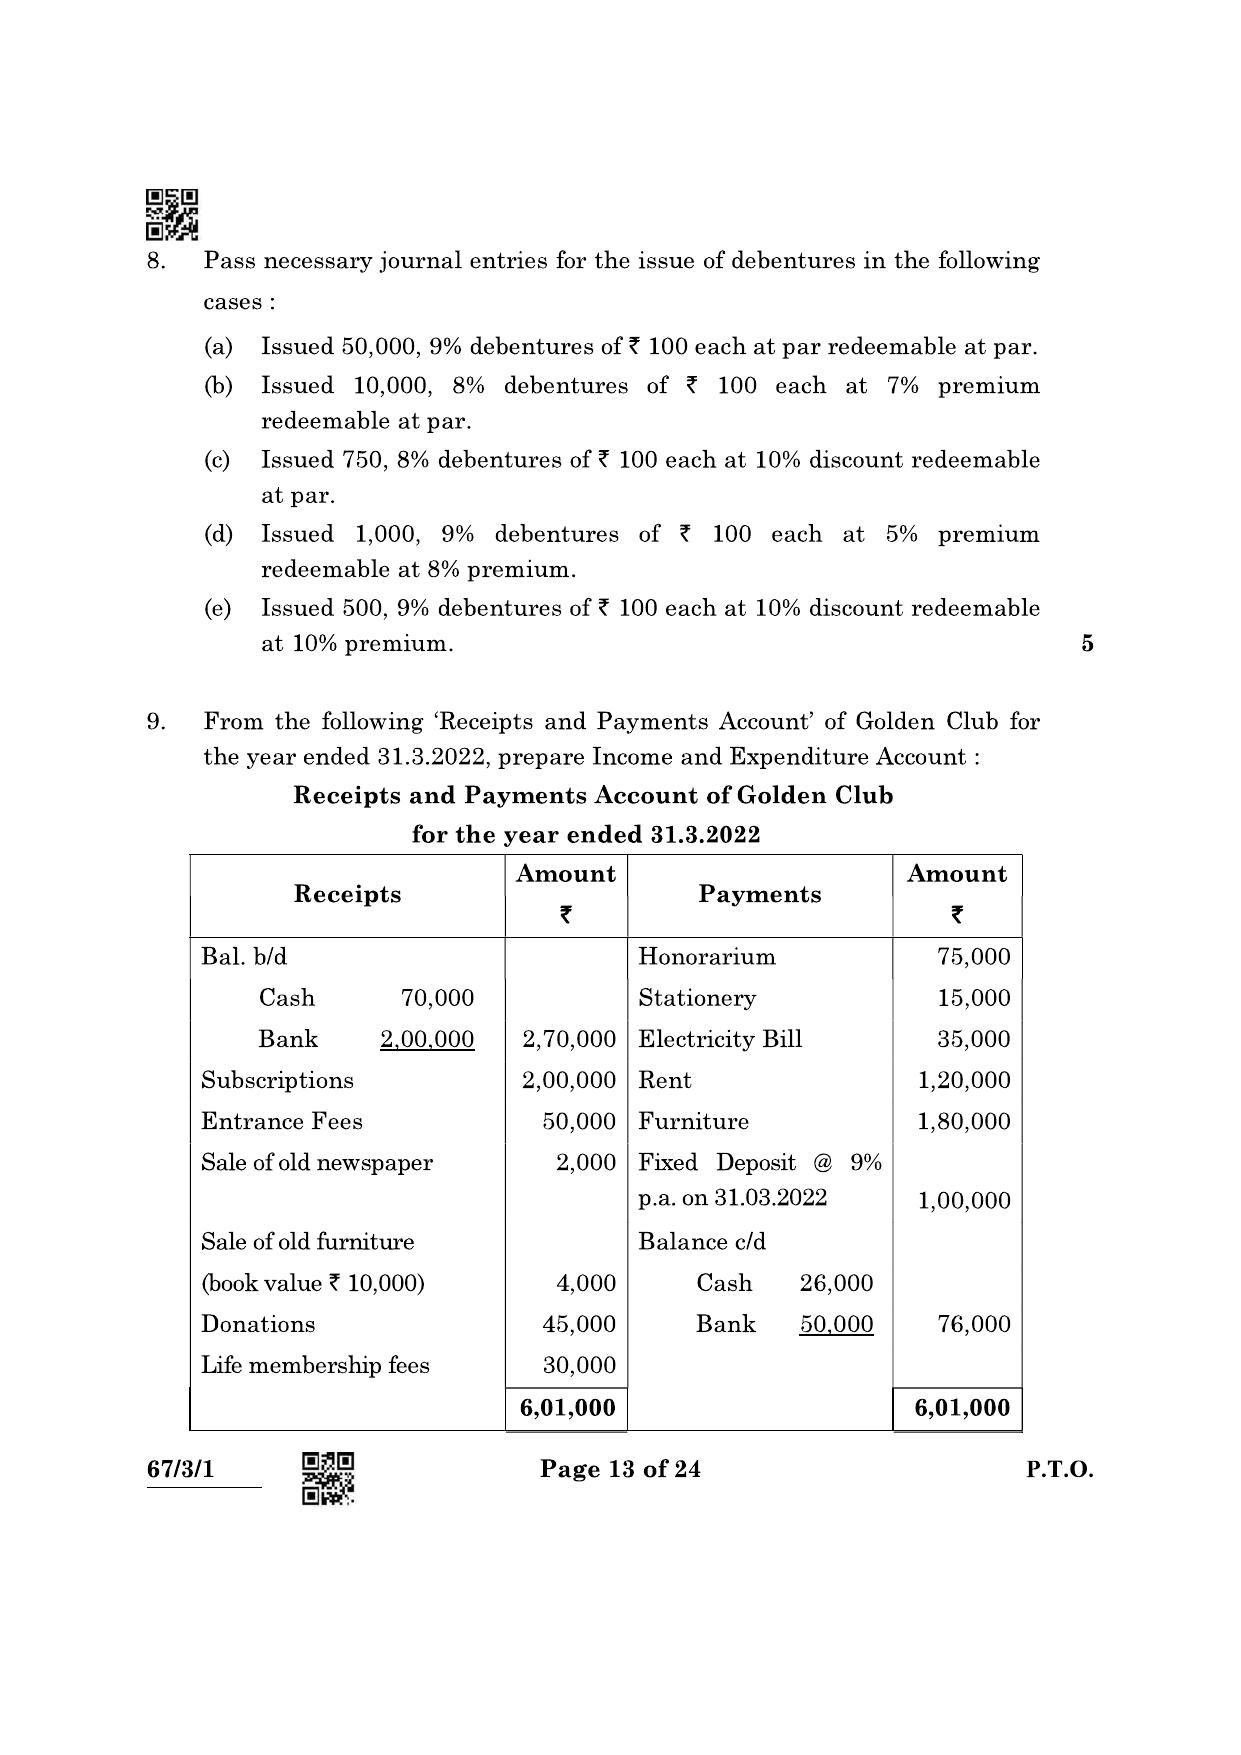 CBSE Class 12 67-3-1 Accountancy 2022 Question Paper - Page 13